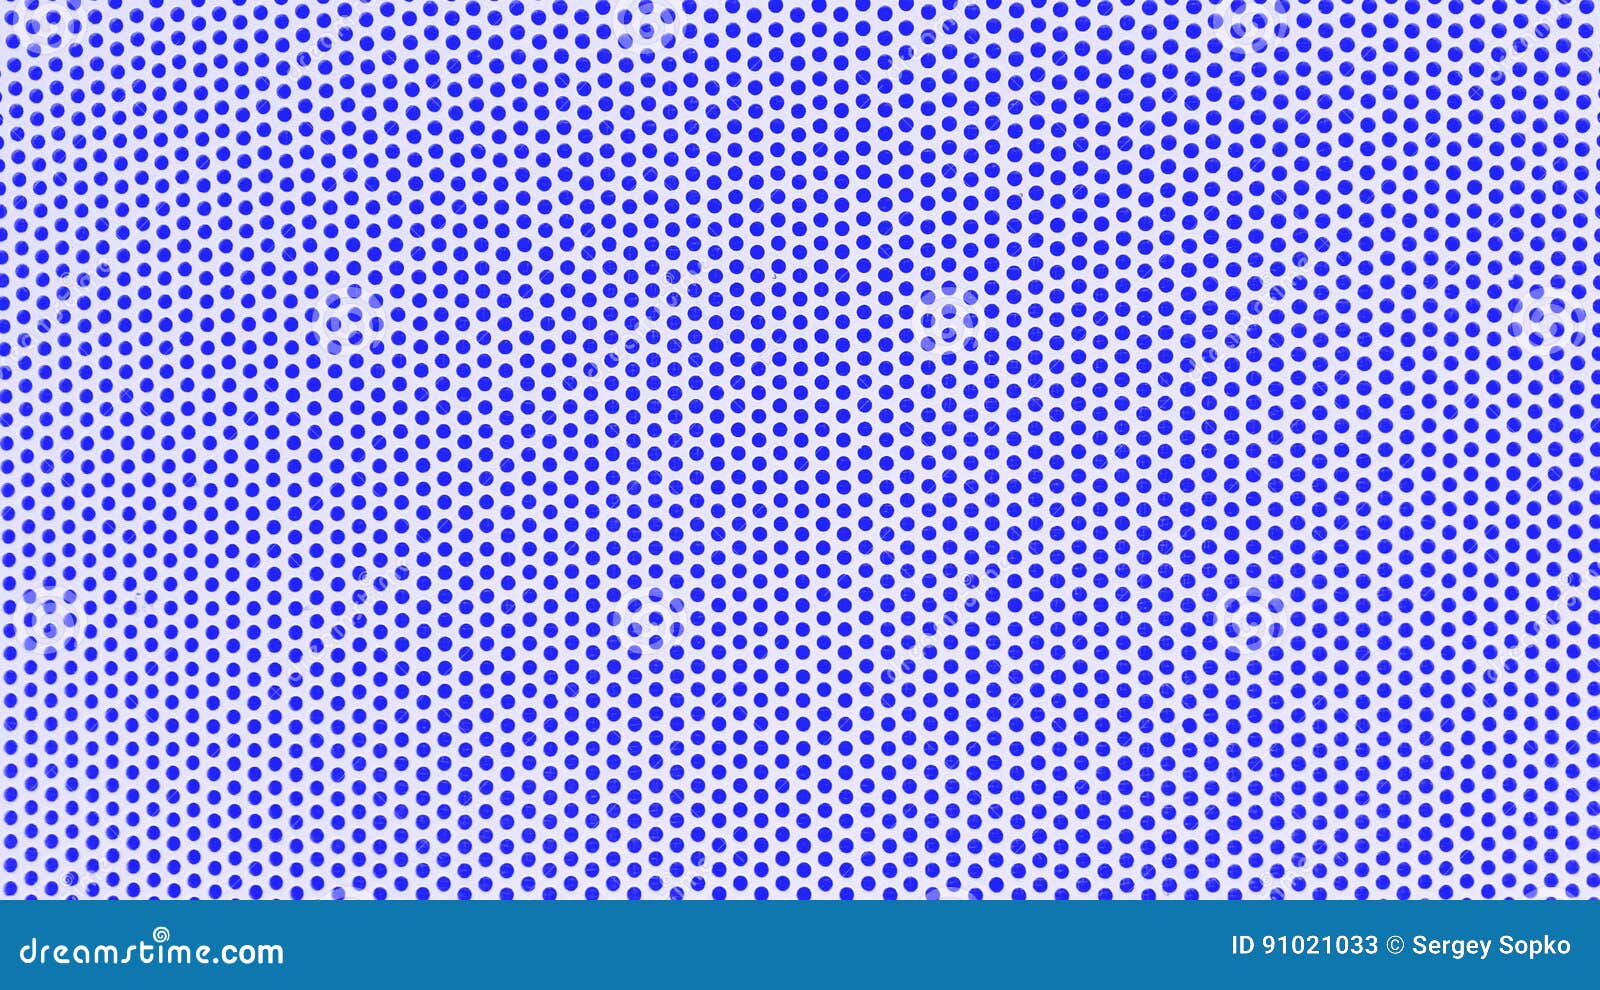 White Background with Blue Dots Stock Image - Image of colorful ...